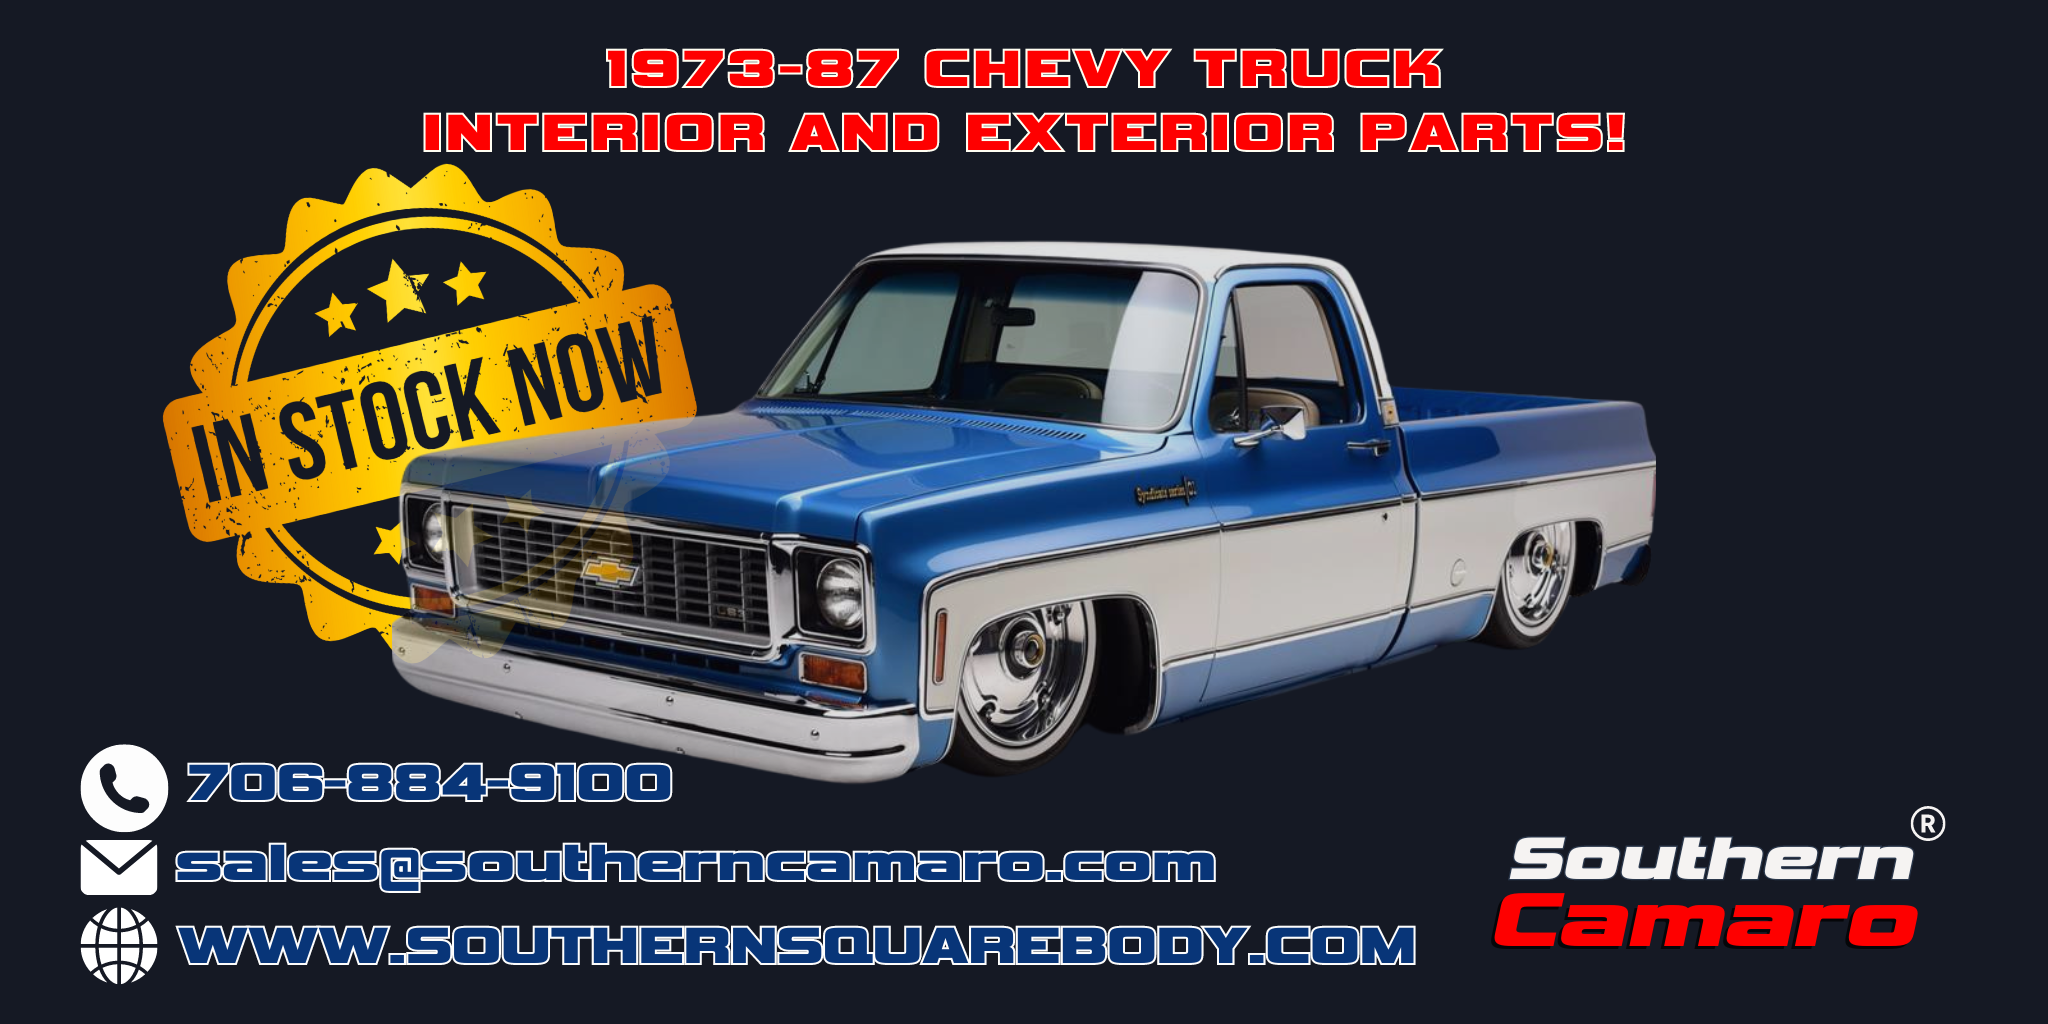 Chevy truck Parts Now Available